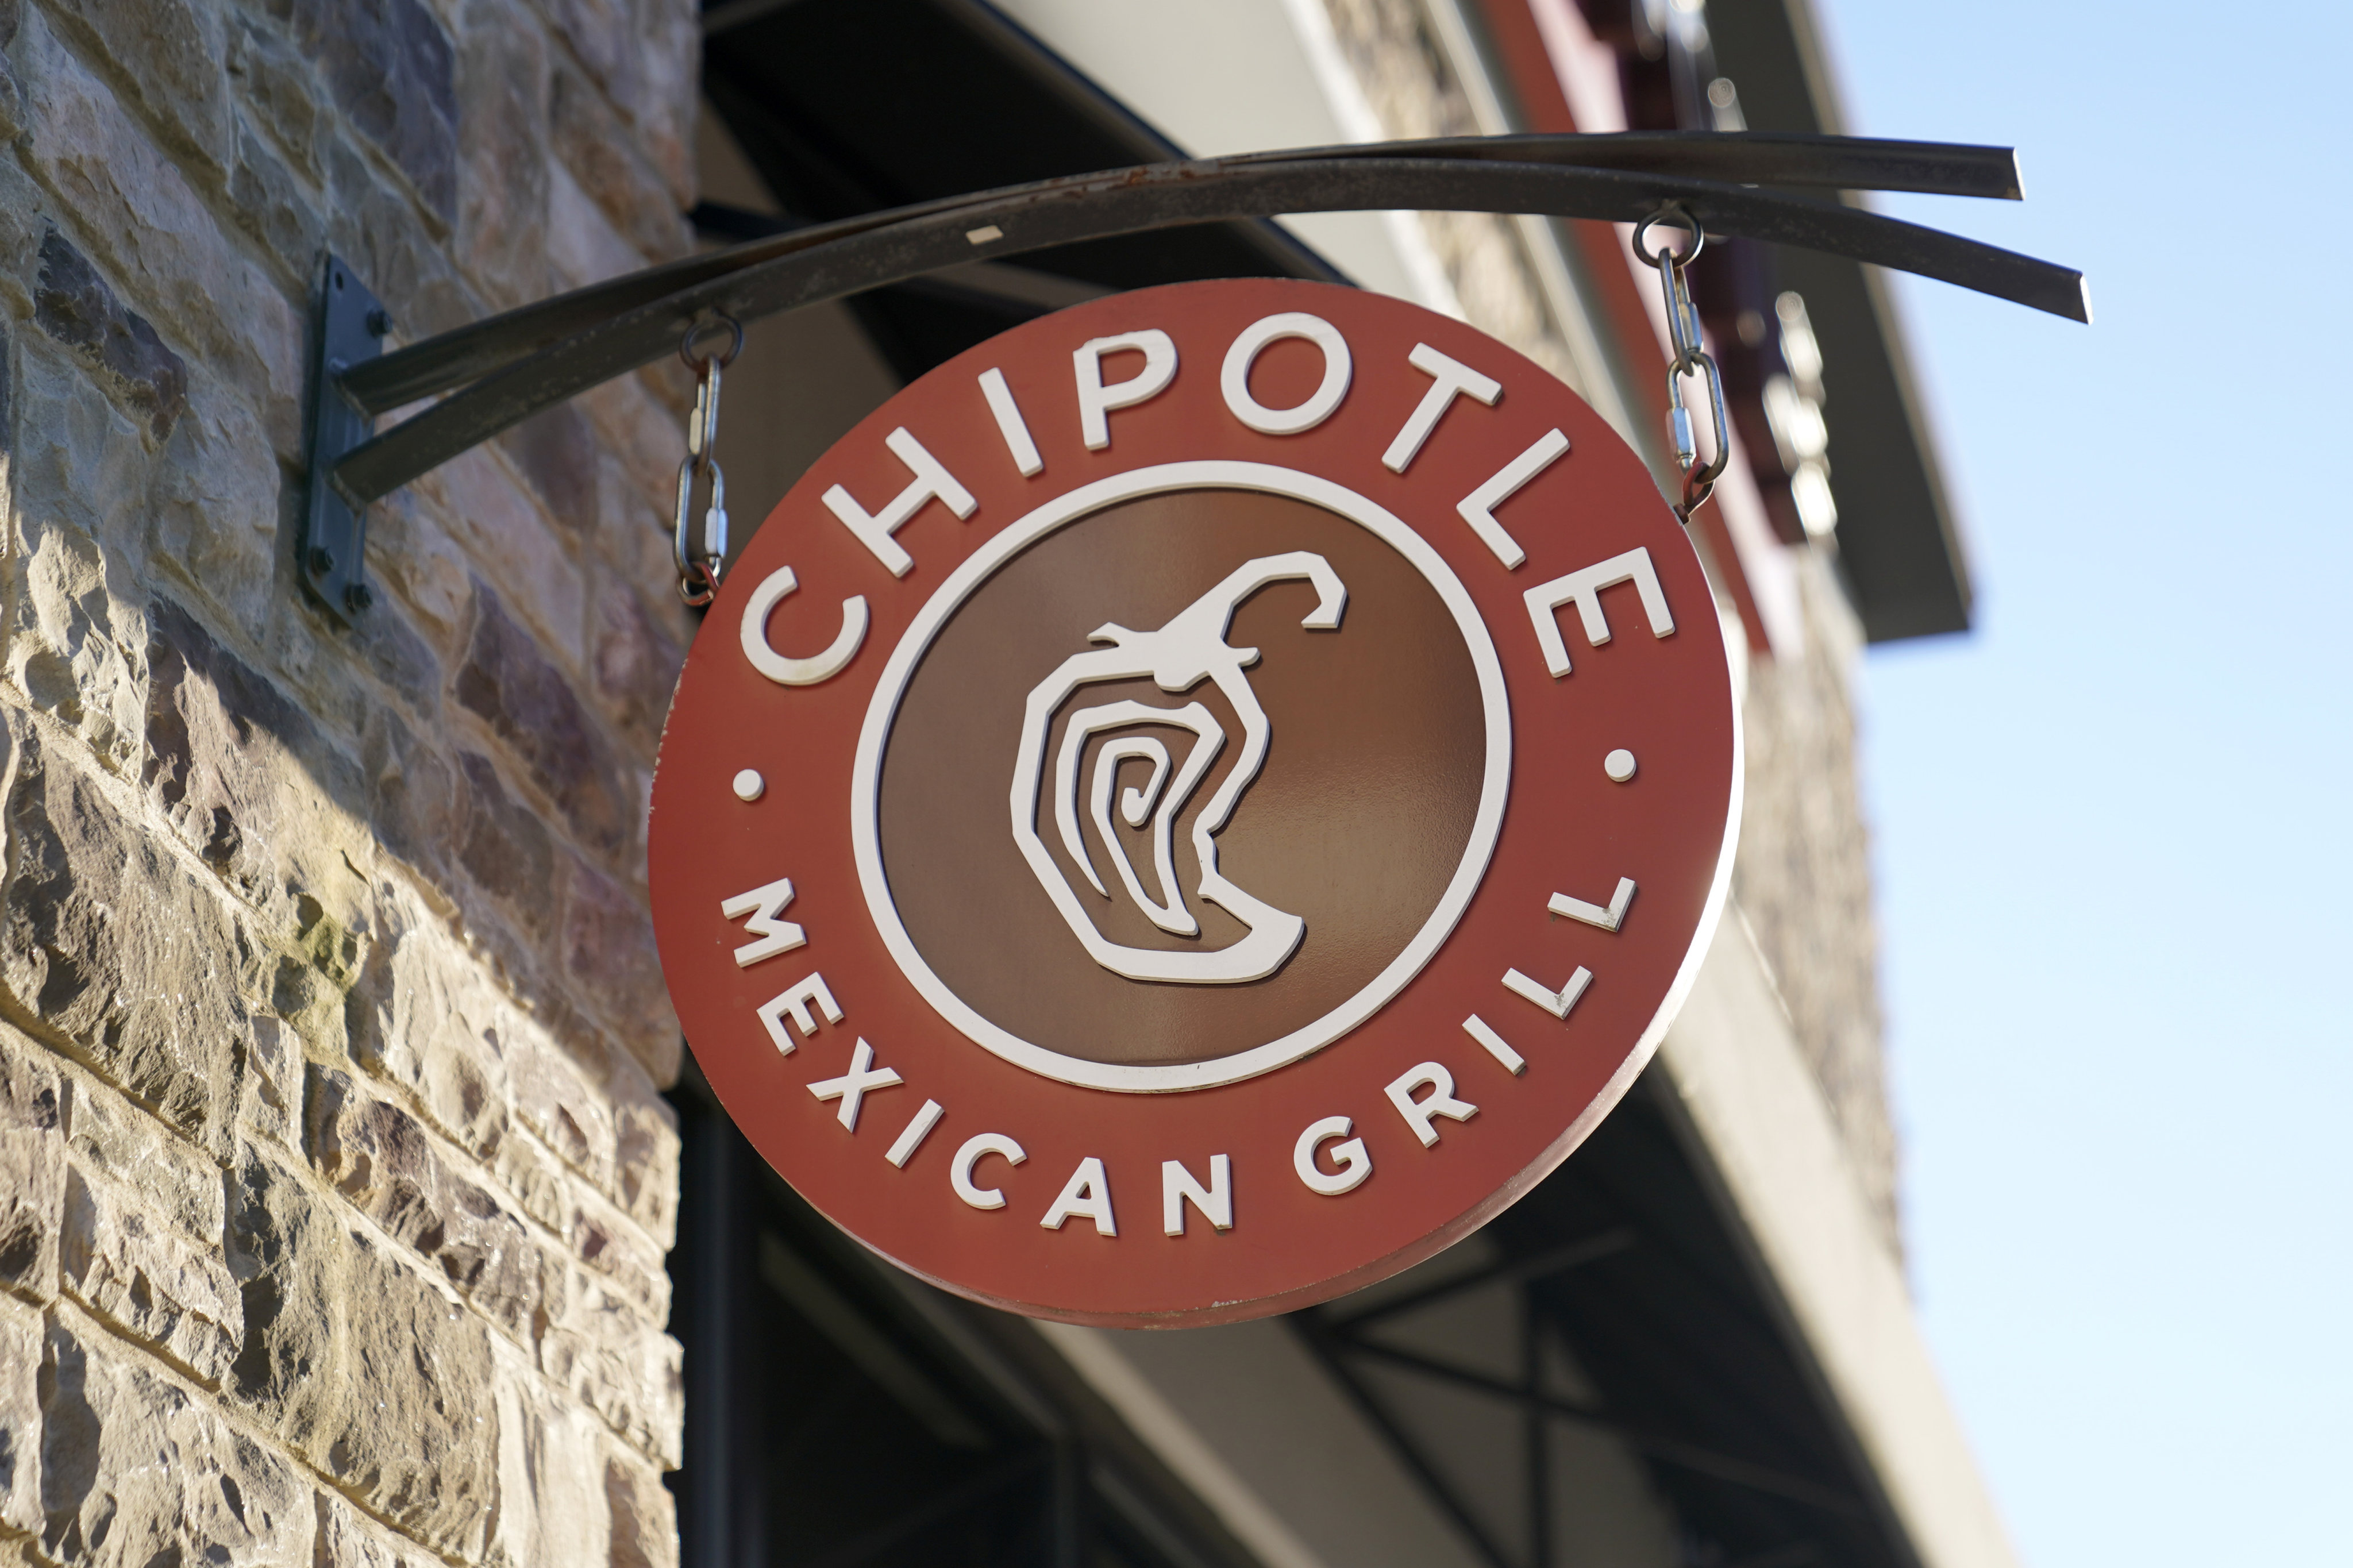 The lawsuit claims that Chipotle violated federal civil rights law protecting employees and job applicants from discrimination based on religion, race, ethnicity, sex and national origin. Photo: AP